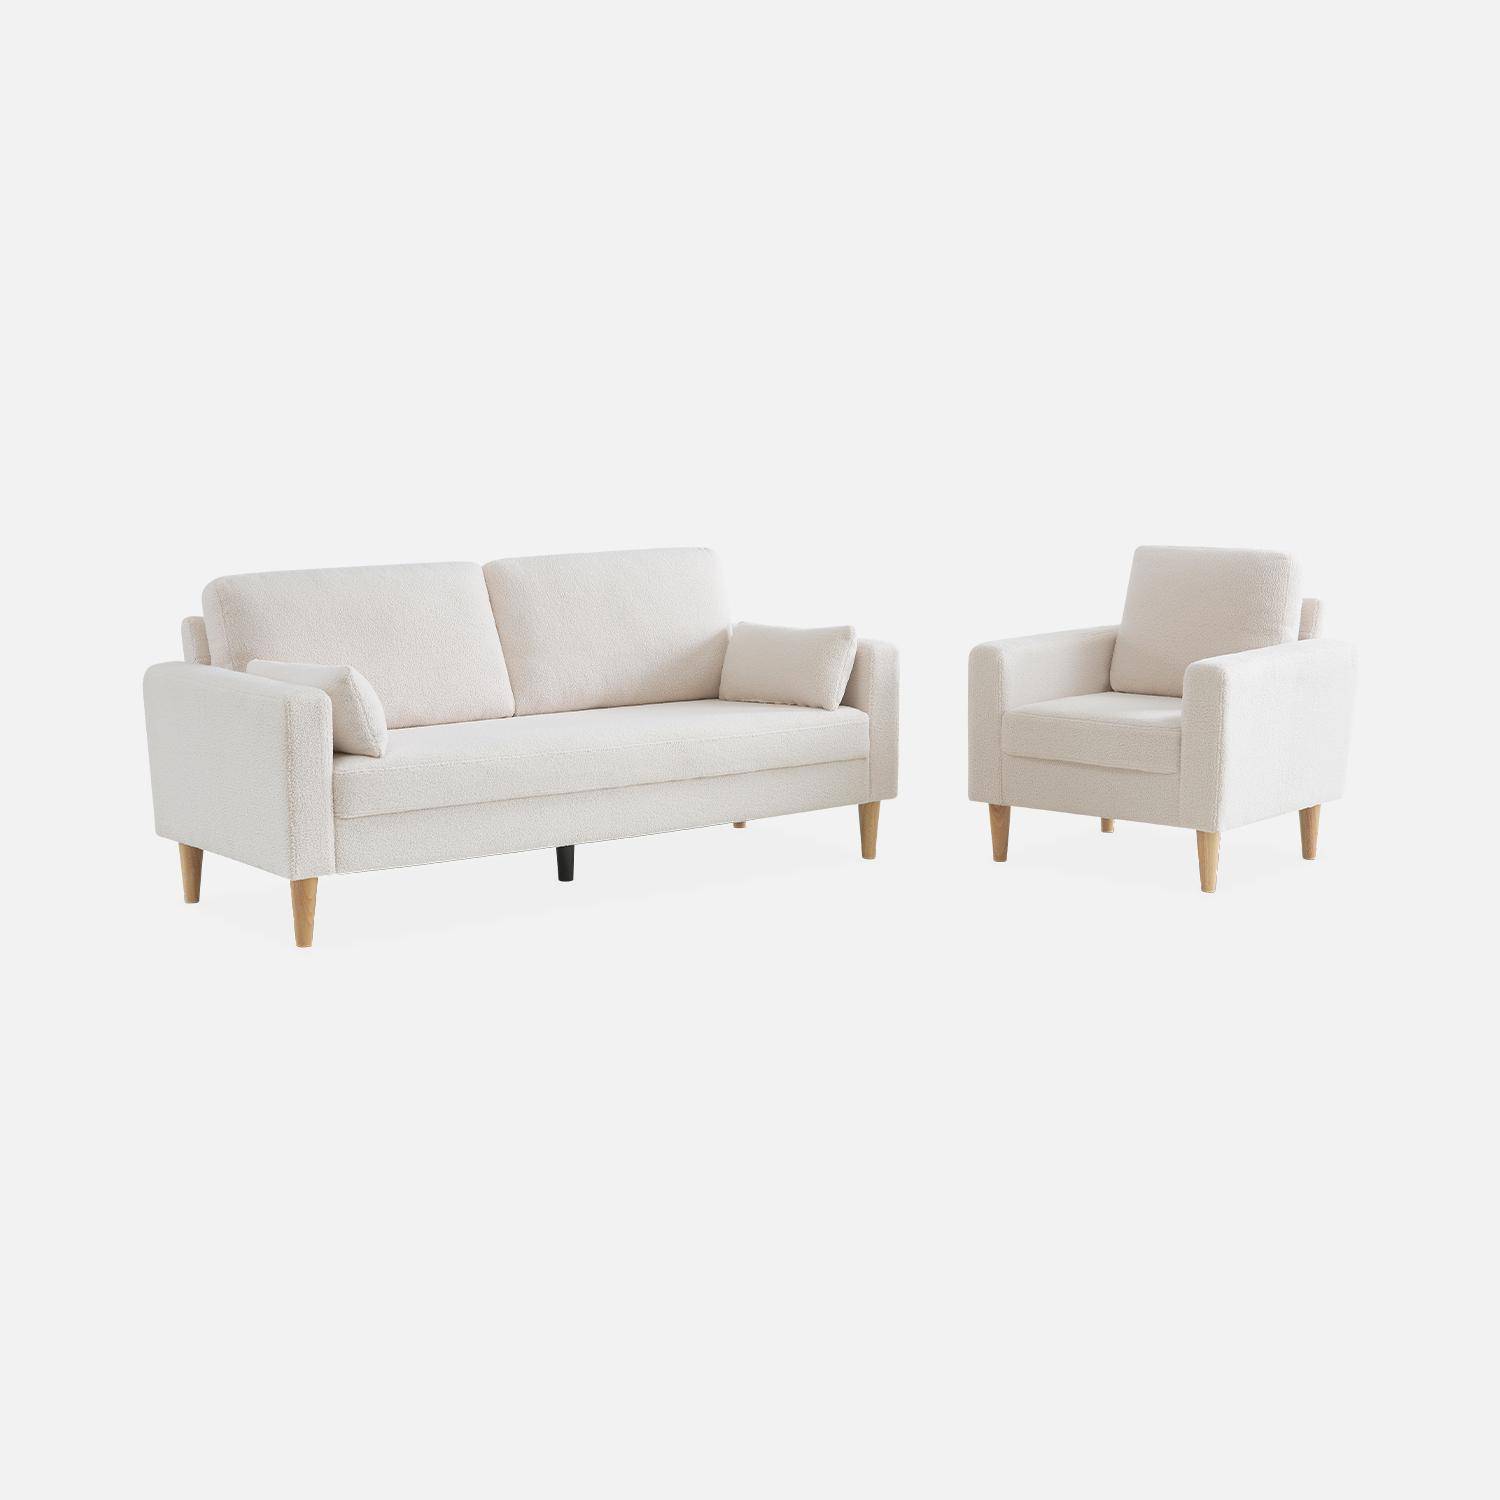 Scandi-style armchair with wooden legs - Bjorn - white boucle Photo6